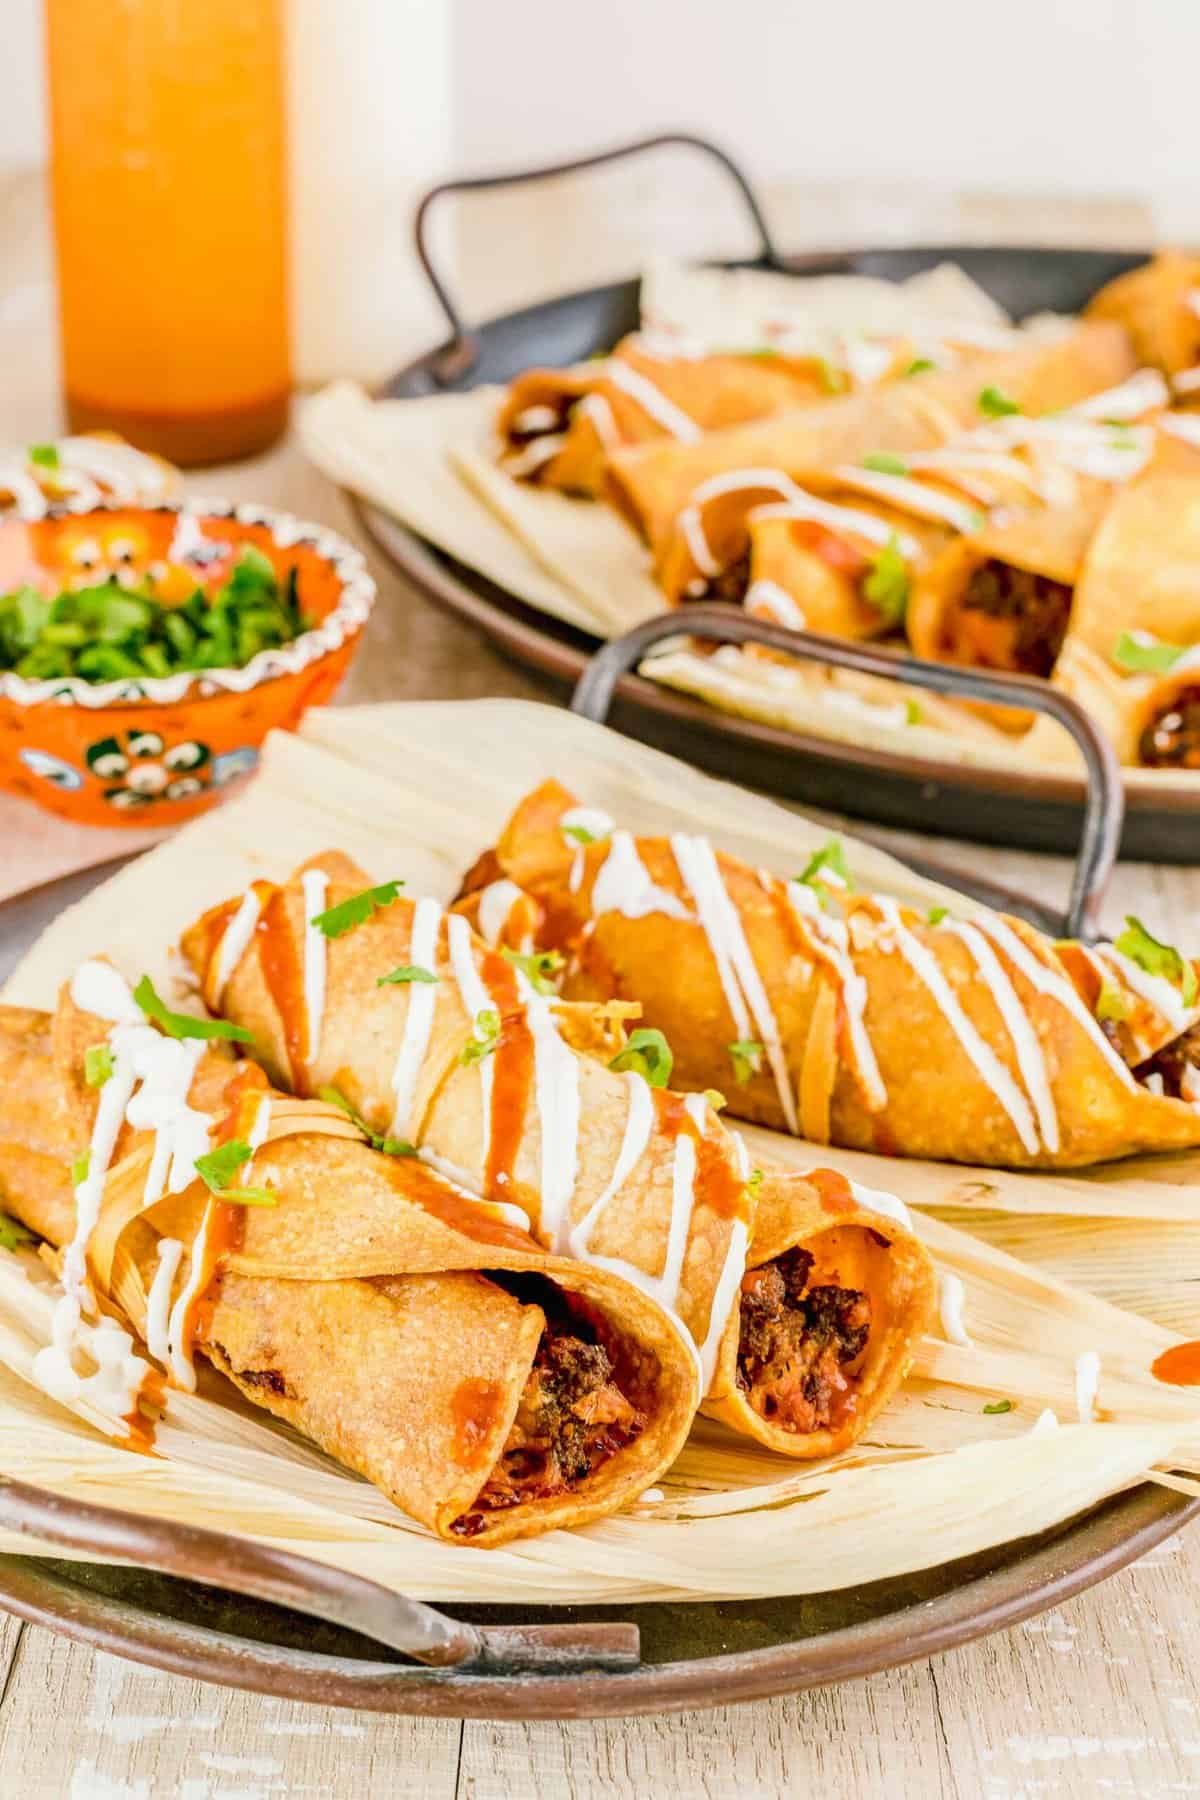 Taquitos are drizzled with sour cream and red sauce.